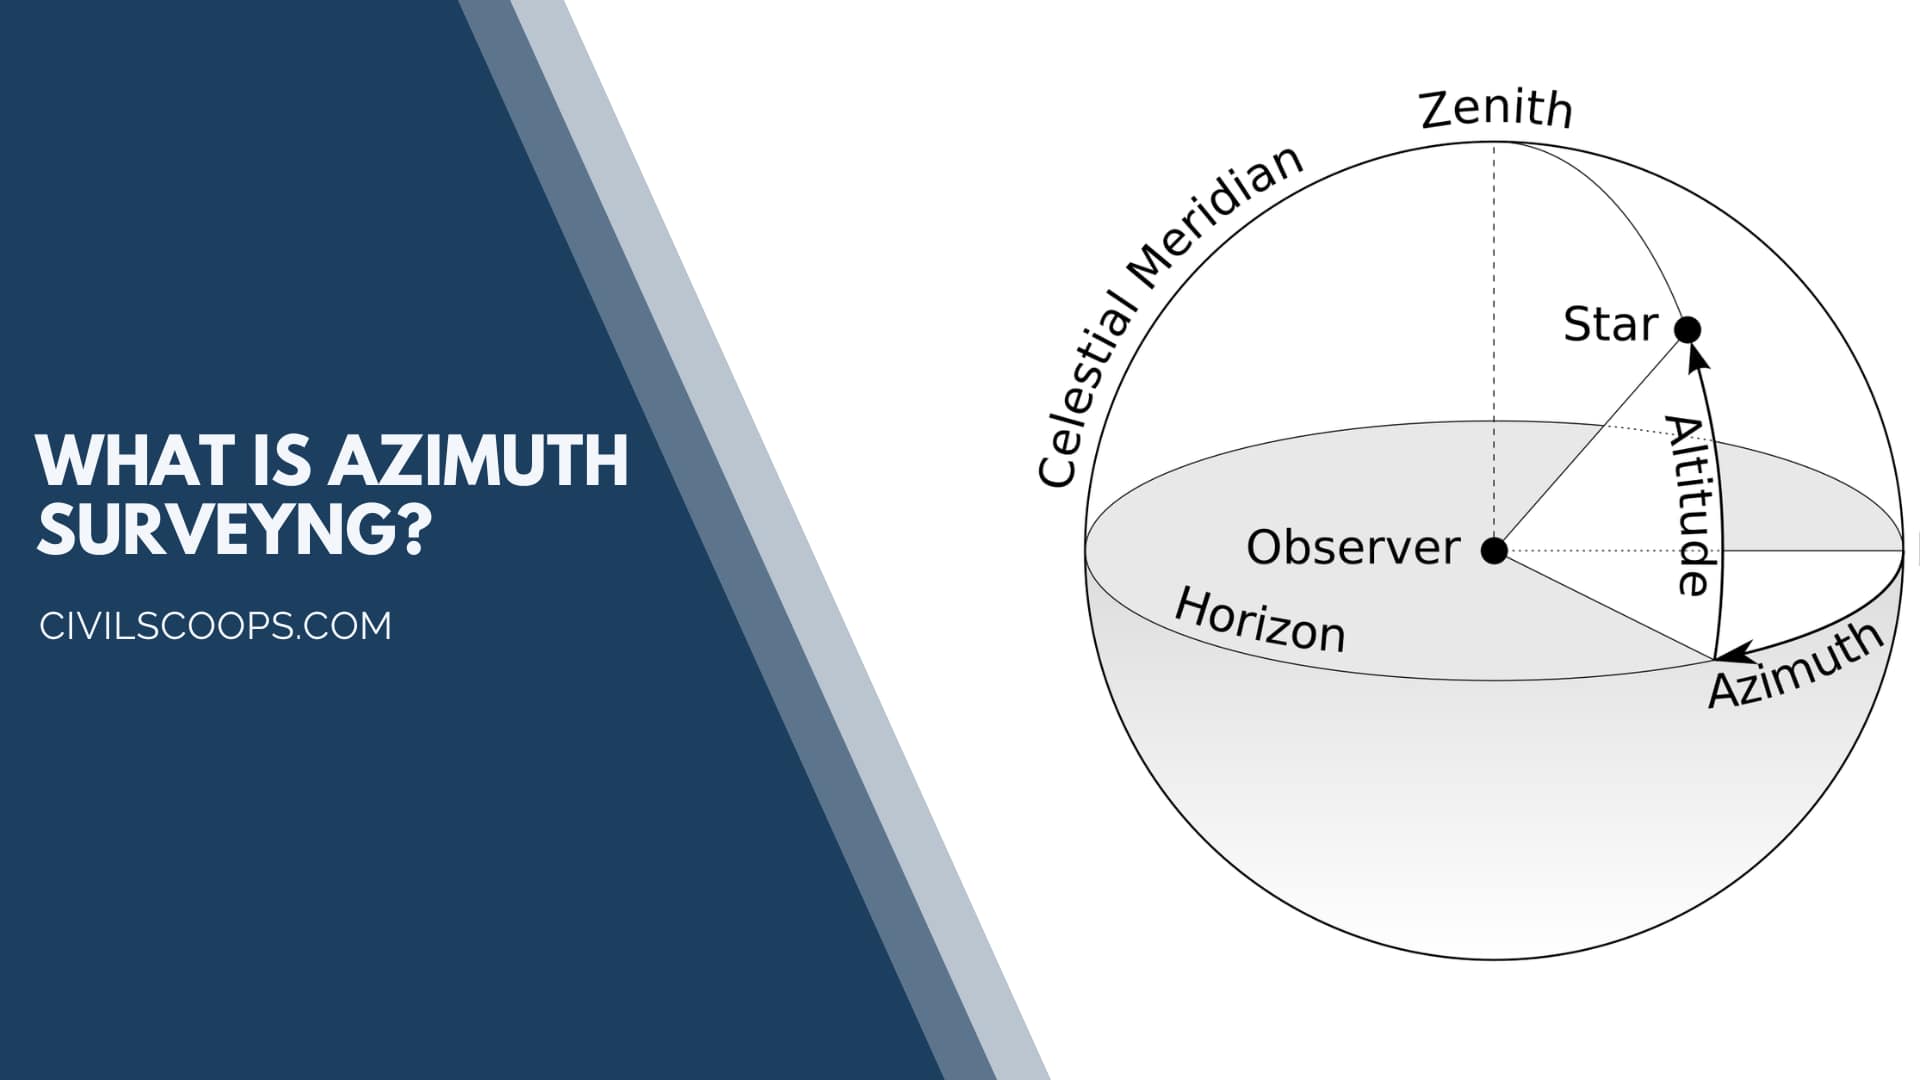 WHAT IS AZIMUTH SURVEYING